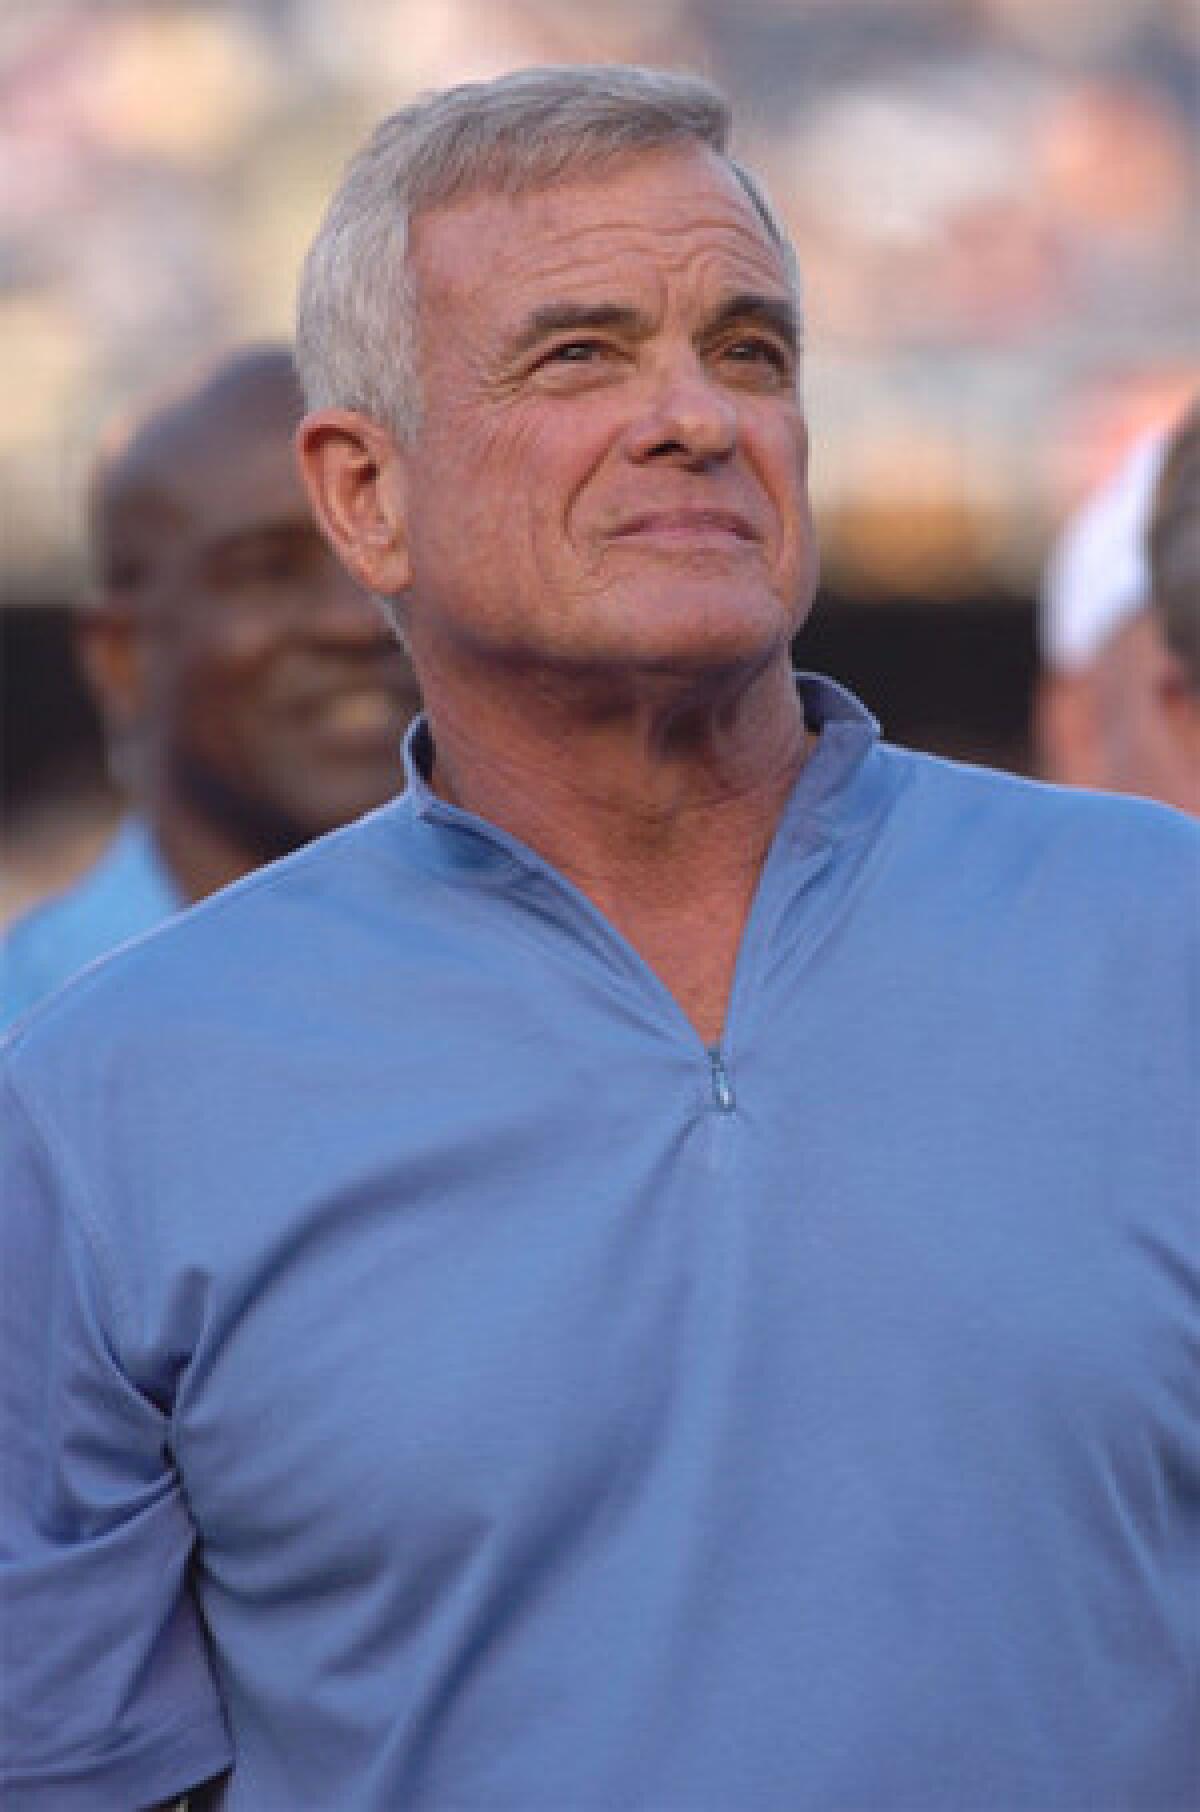 Lance Alworth, shown in 2005, has got his Super Bowl ring back. Though he spent most of his career with the San Diego Chargers, Alworth was with the Dallas Cowboys when they won Super Bowl VI in 1972.